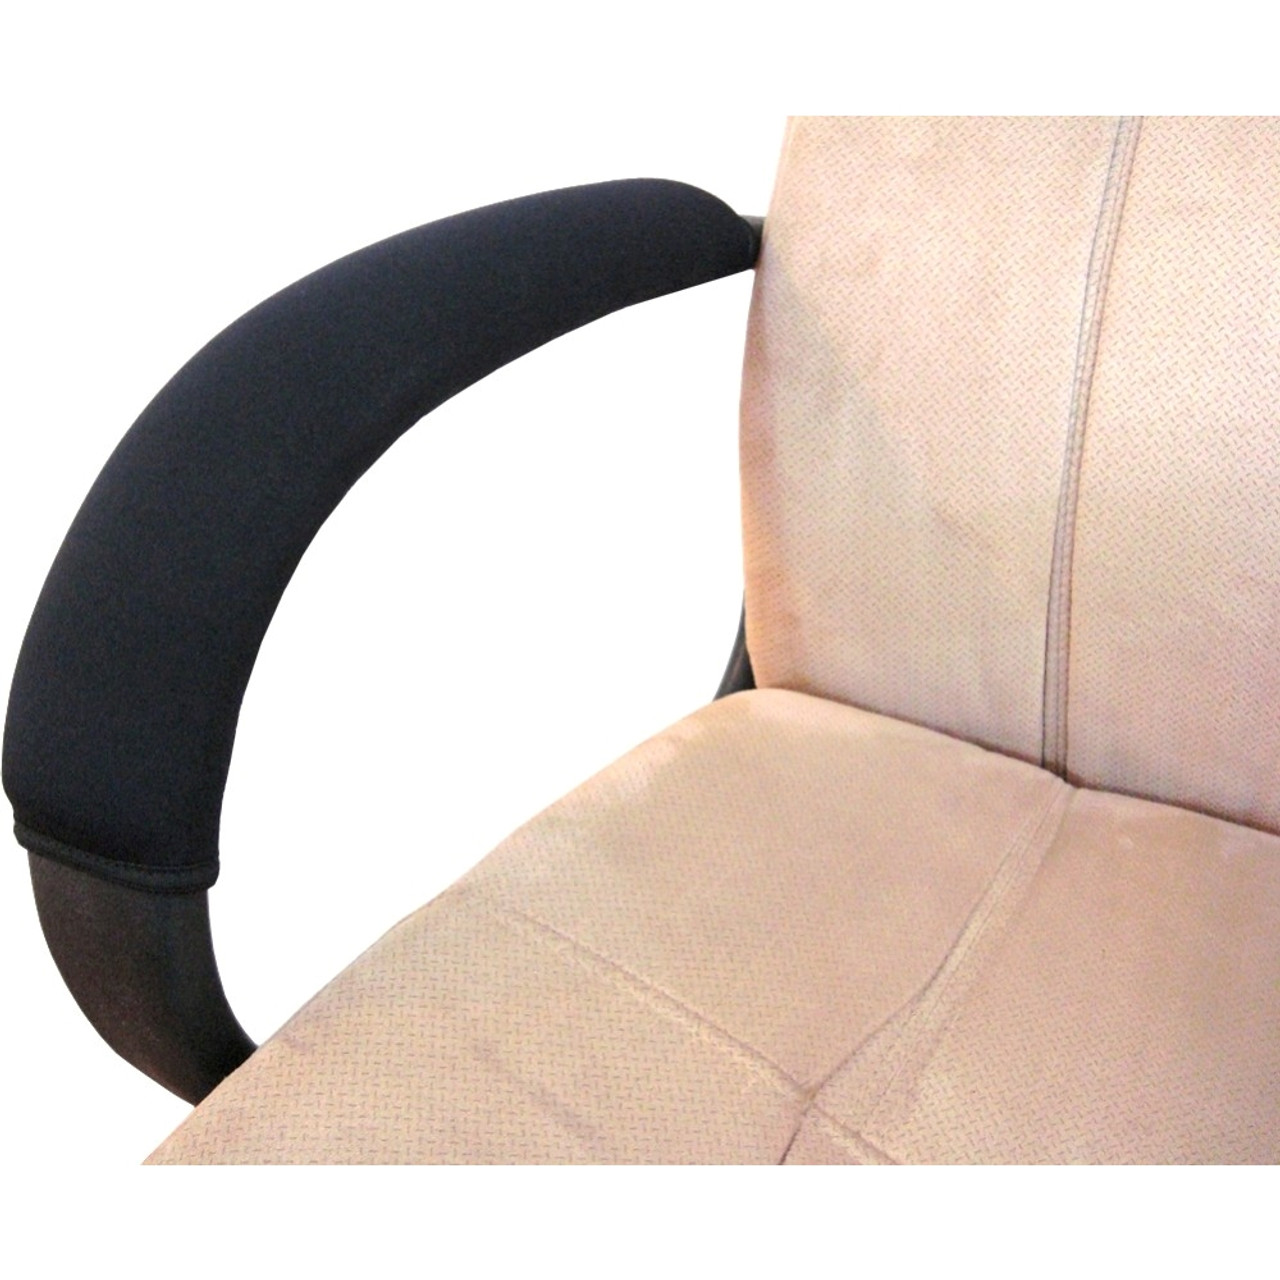 Soft Chair Arm Pad Covers Stretch Over Armrests 9 to 10.5 Long. Restore, Protect, and Cushion Chair Armrests. Complete Set of 2. Simple Installation